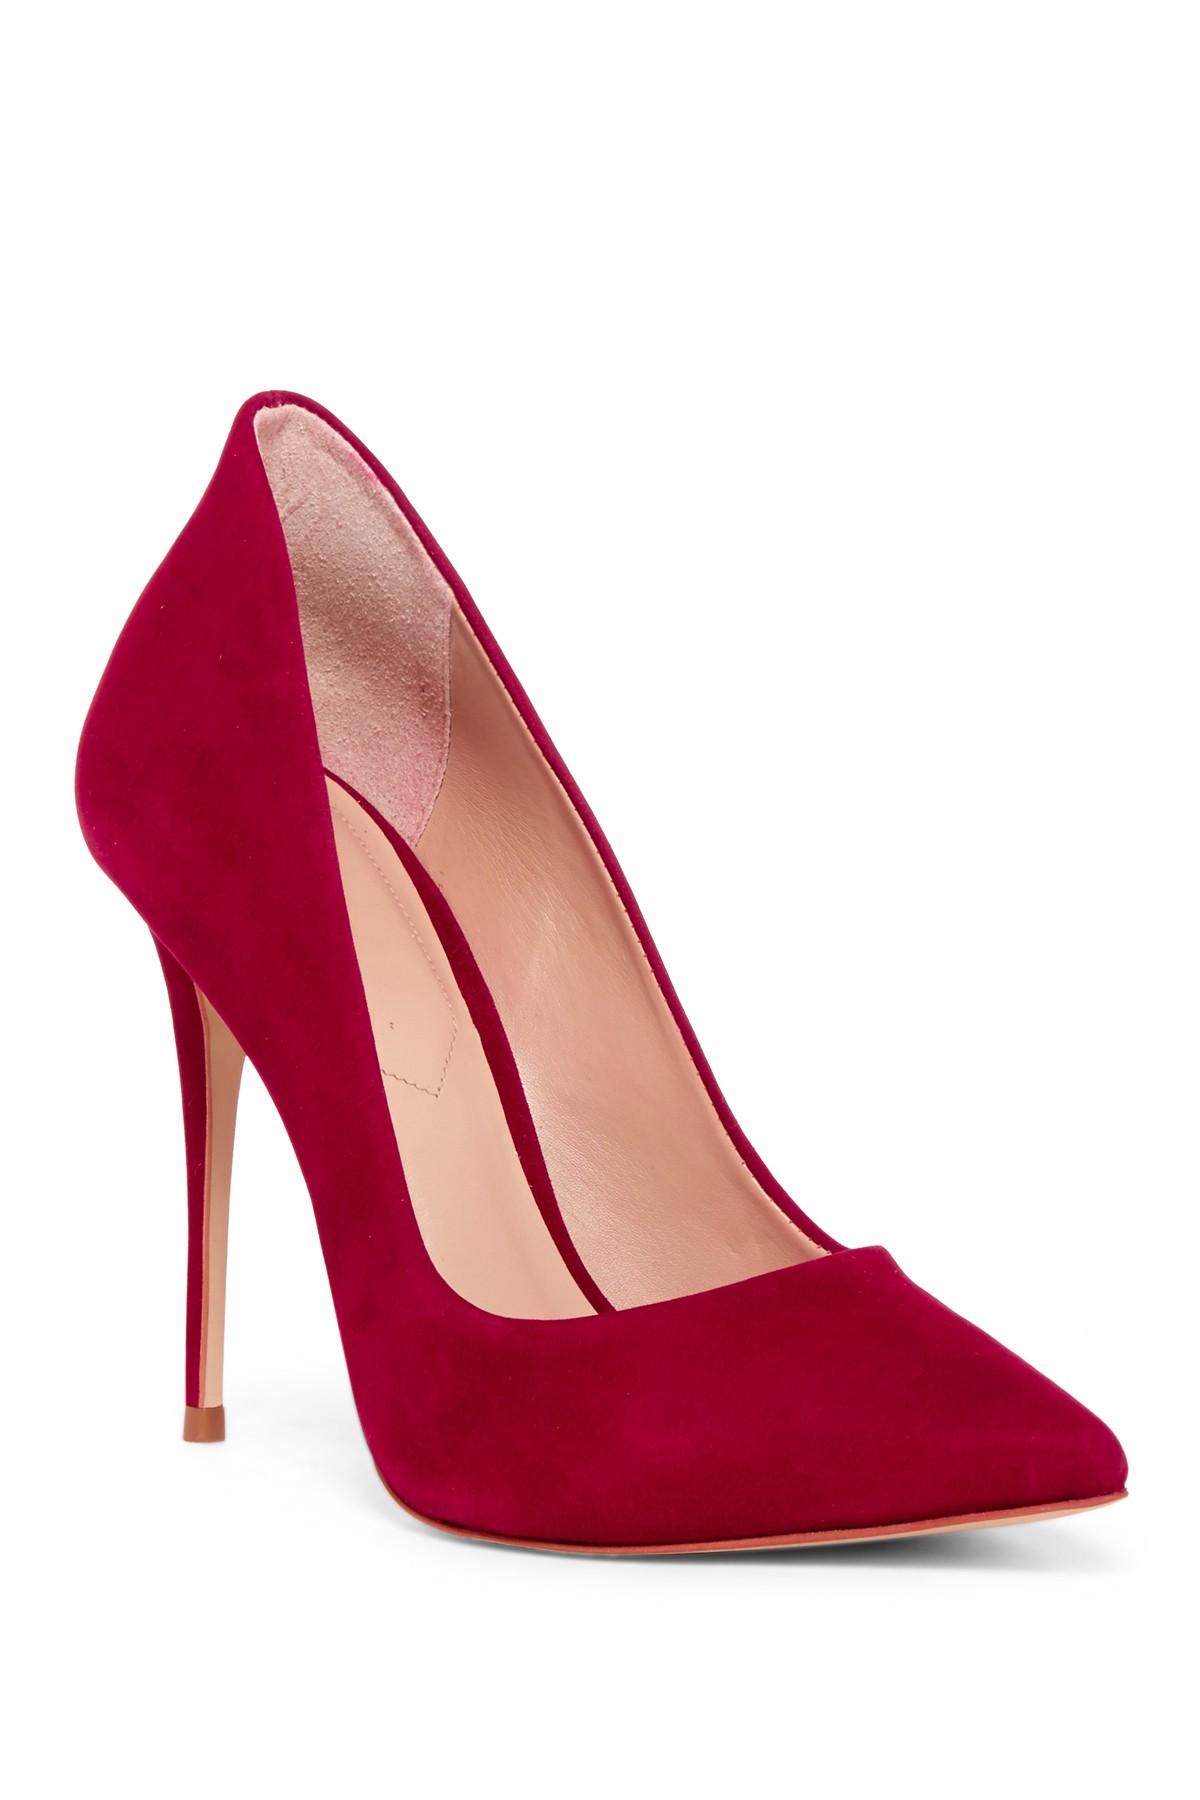 ALDO Leather Cassedy Pump in Bordeaux (Red) - Lyst